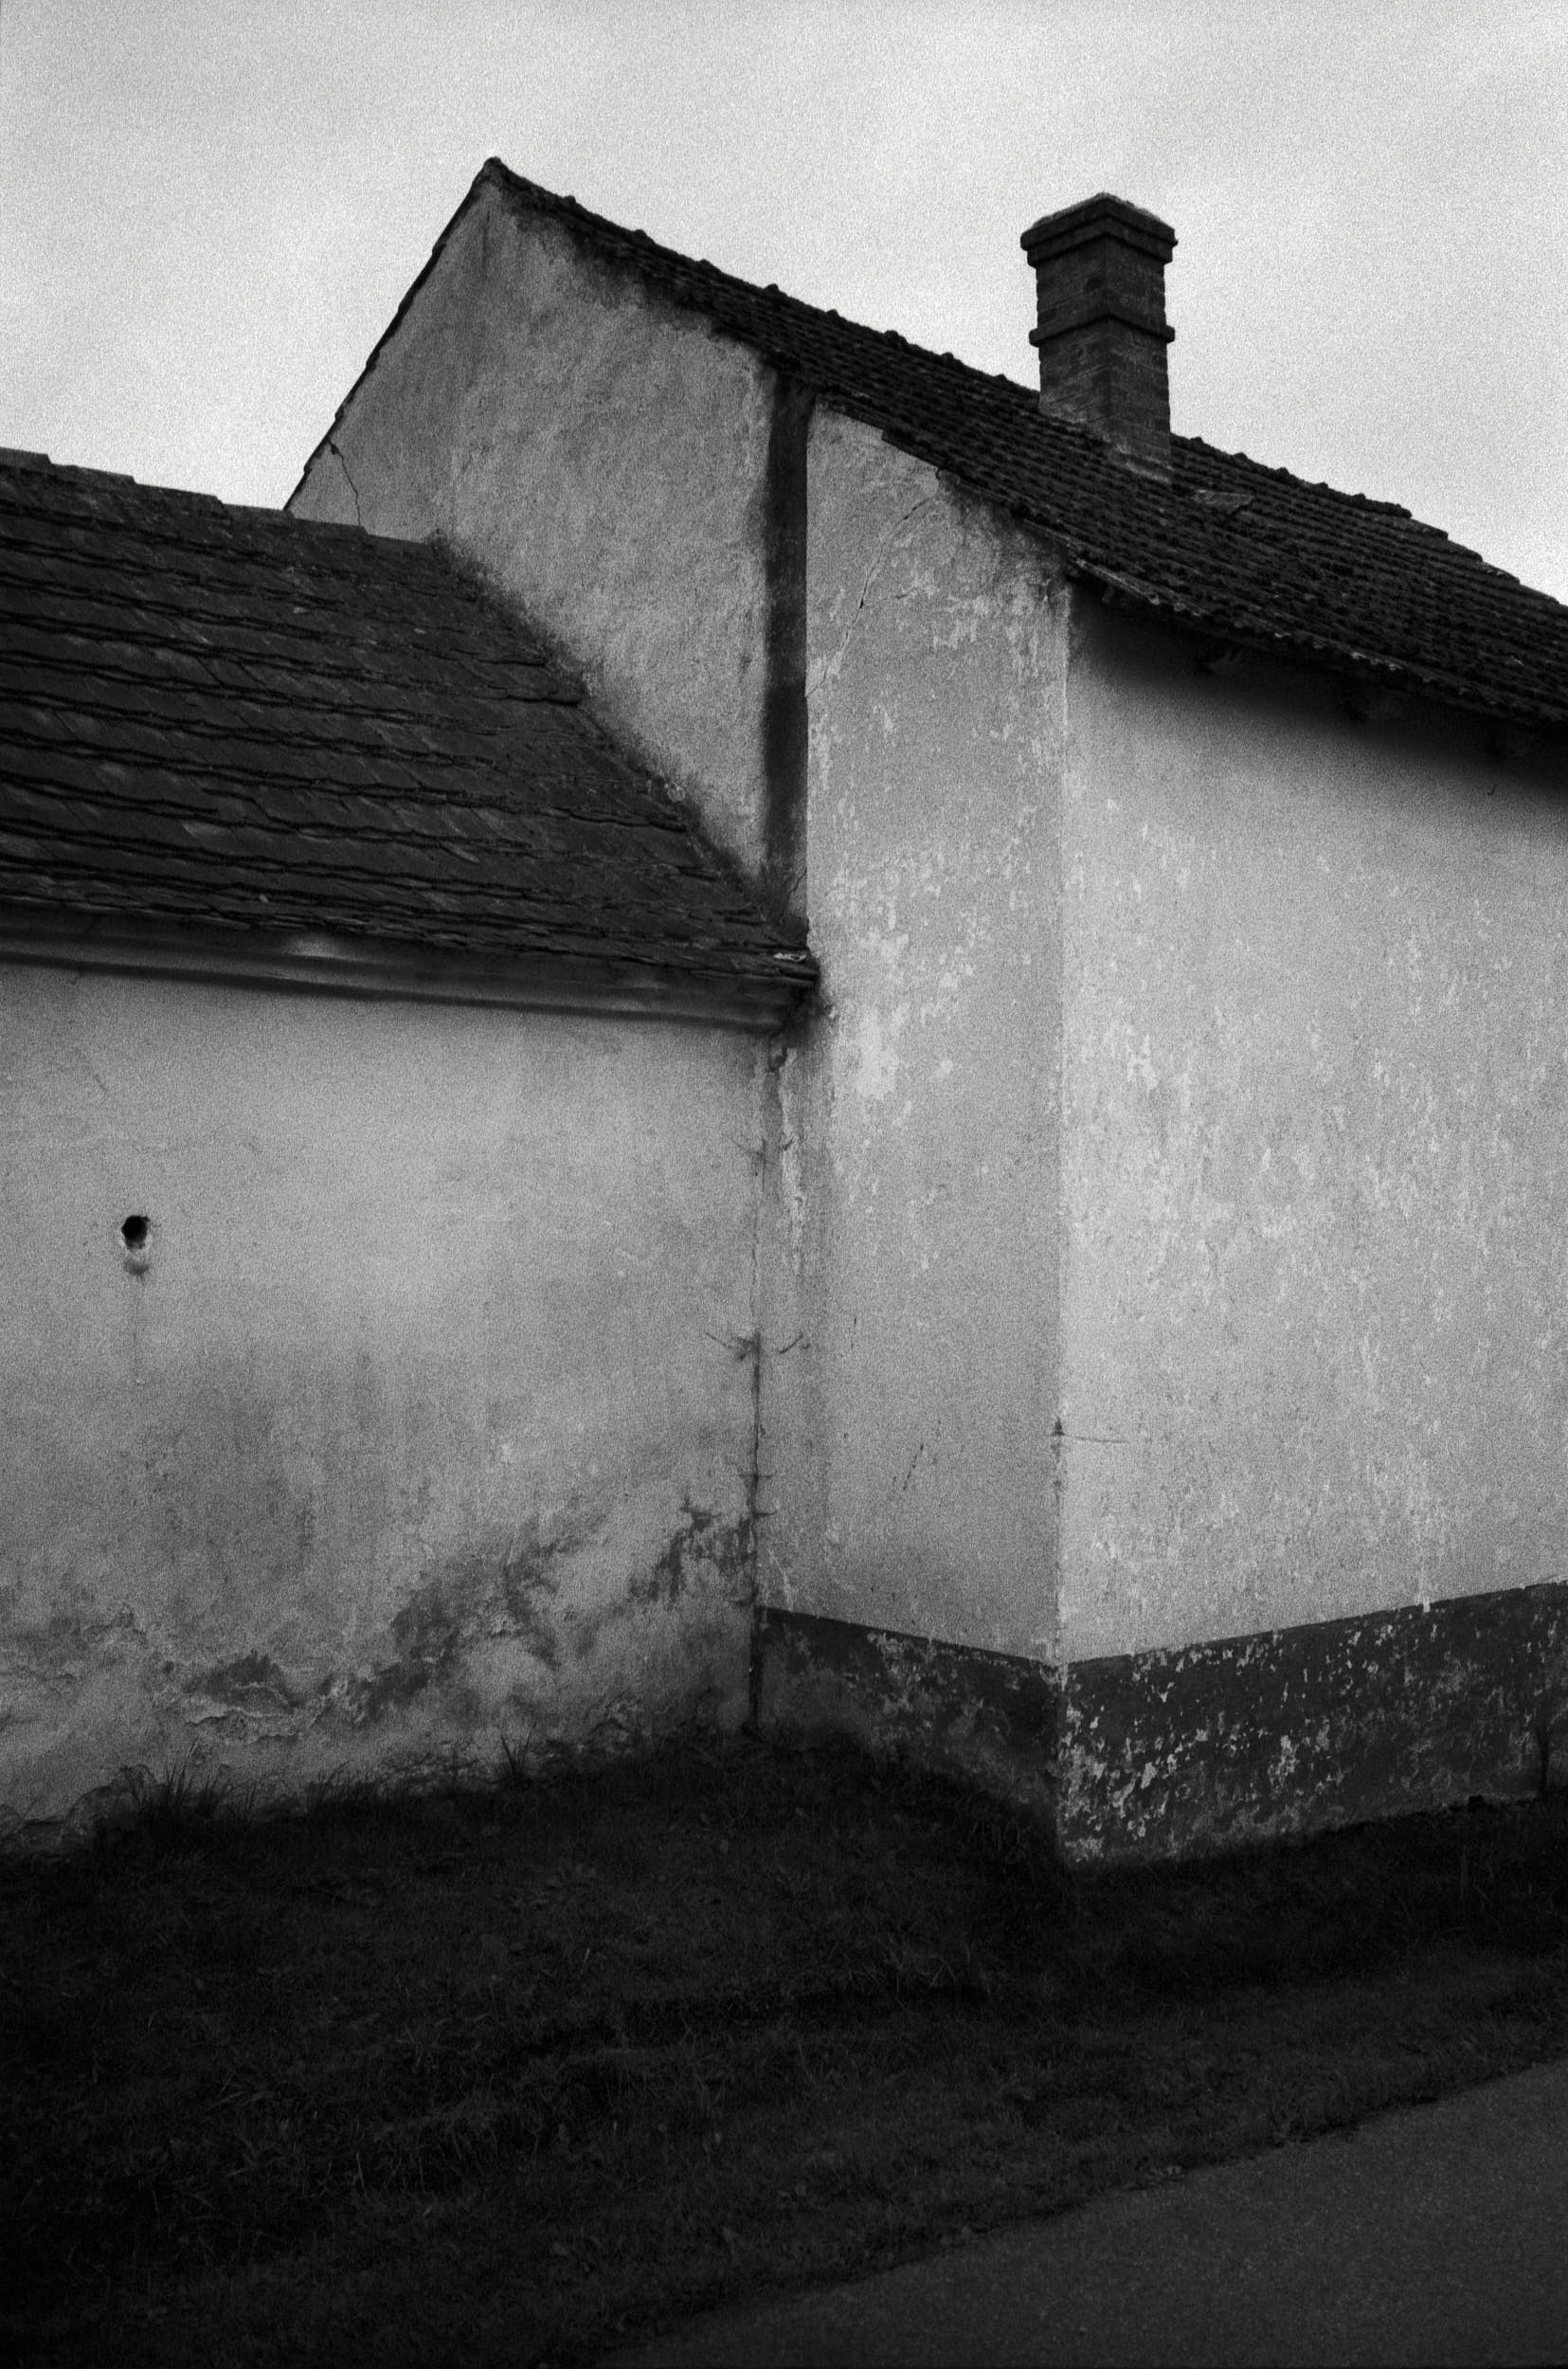 Black and white documentary photography: scenes from everyday life of a small village in the south of Czech Republic.